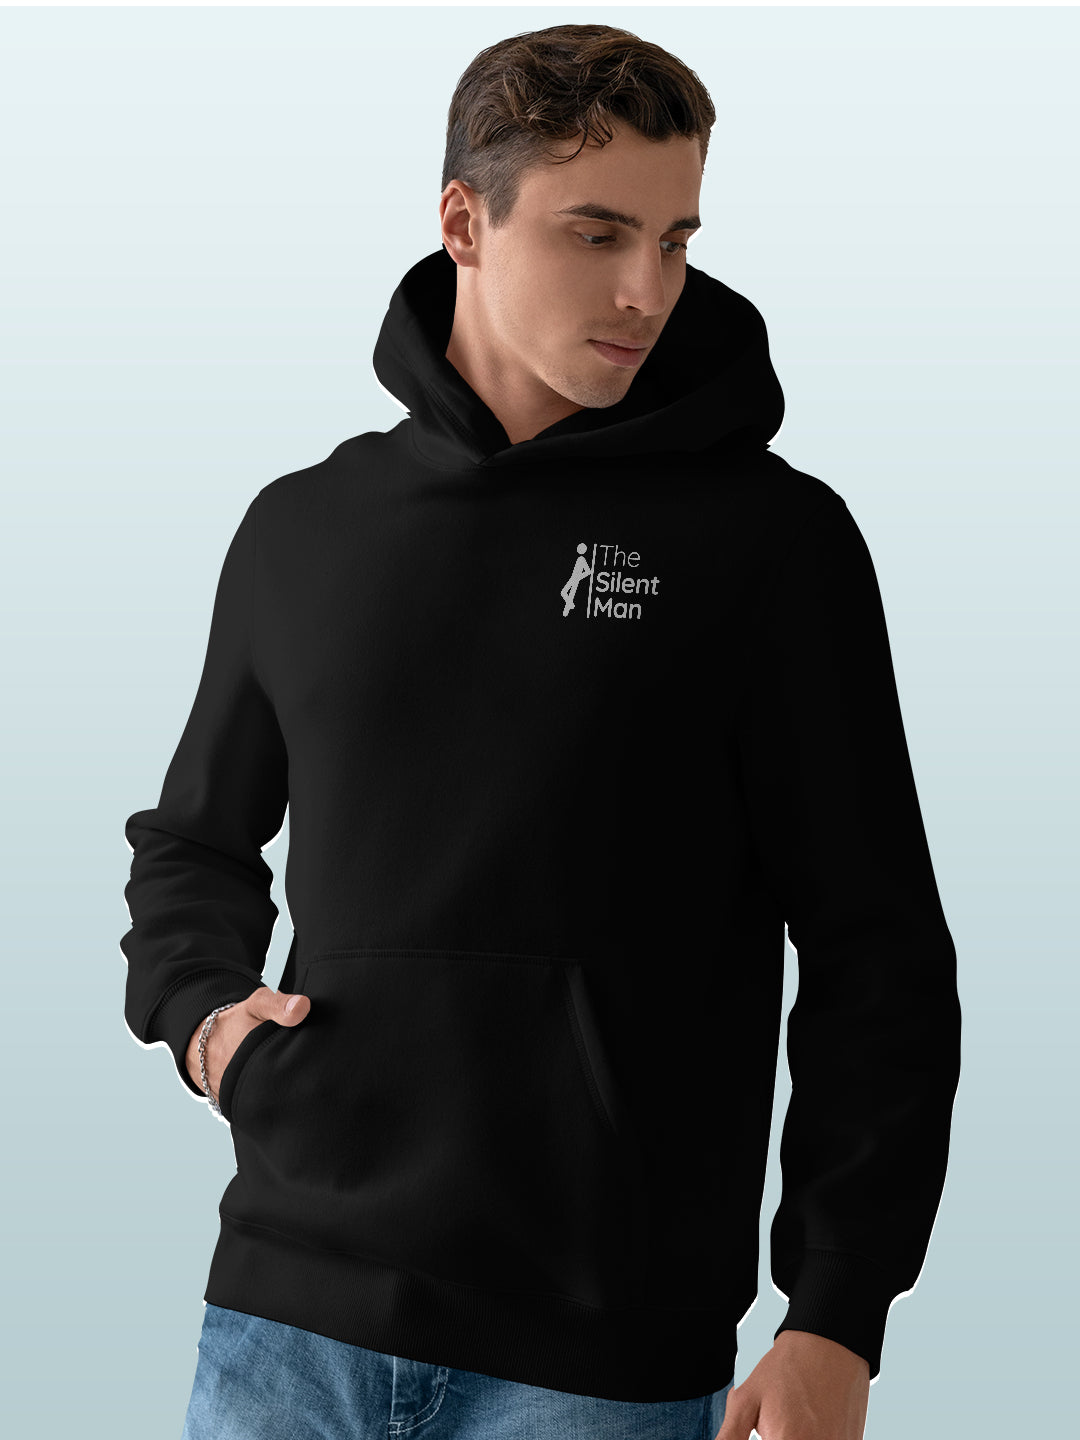 Official Photographer Hoodie